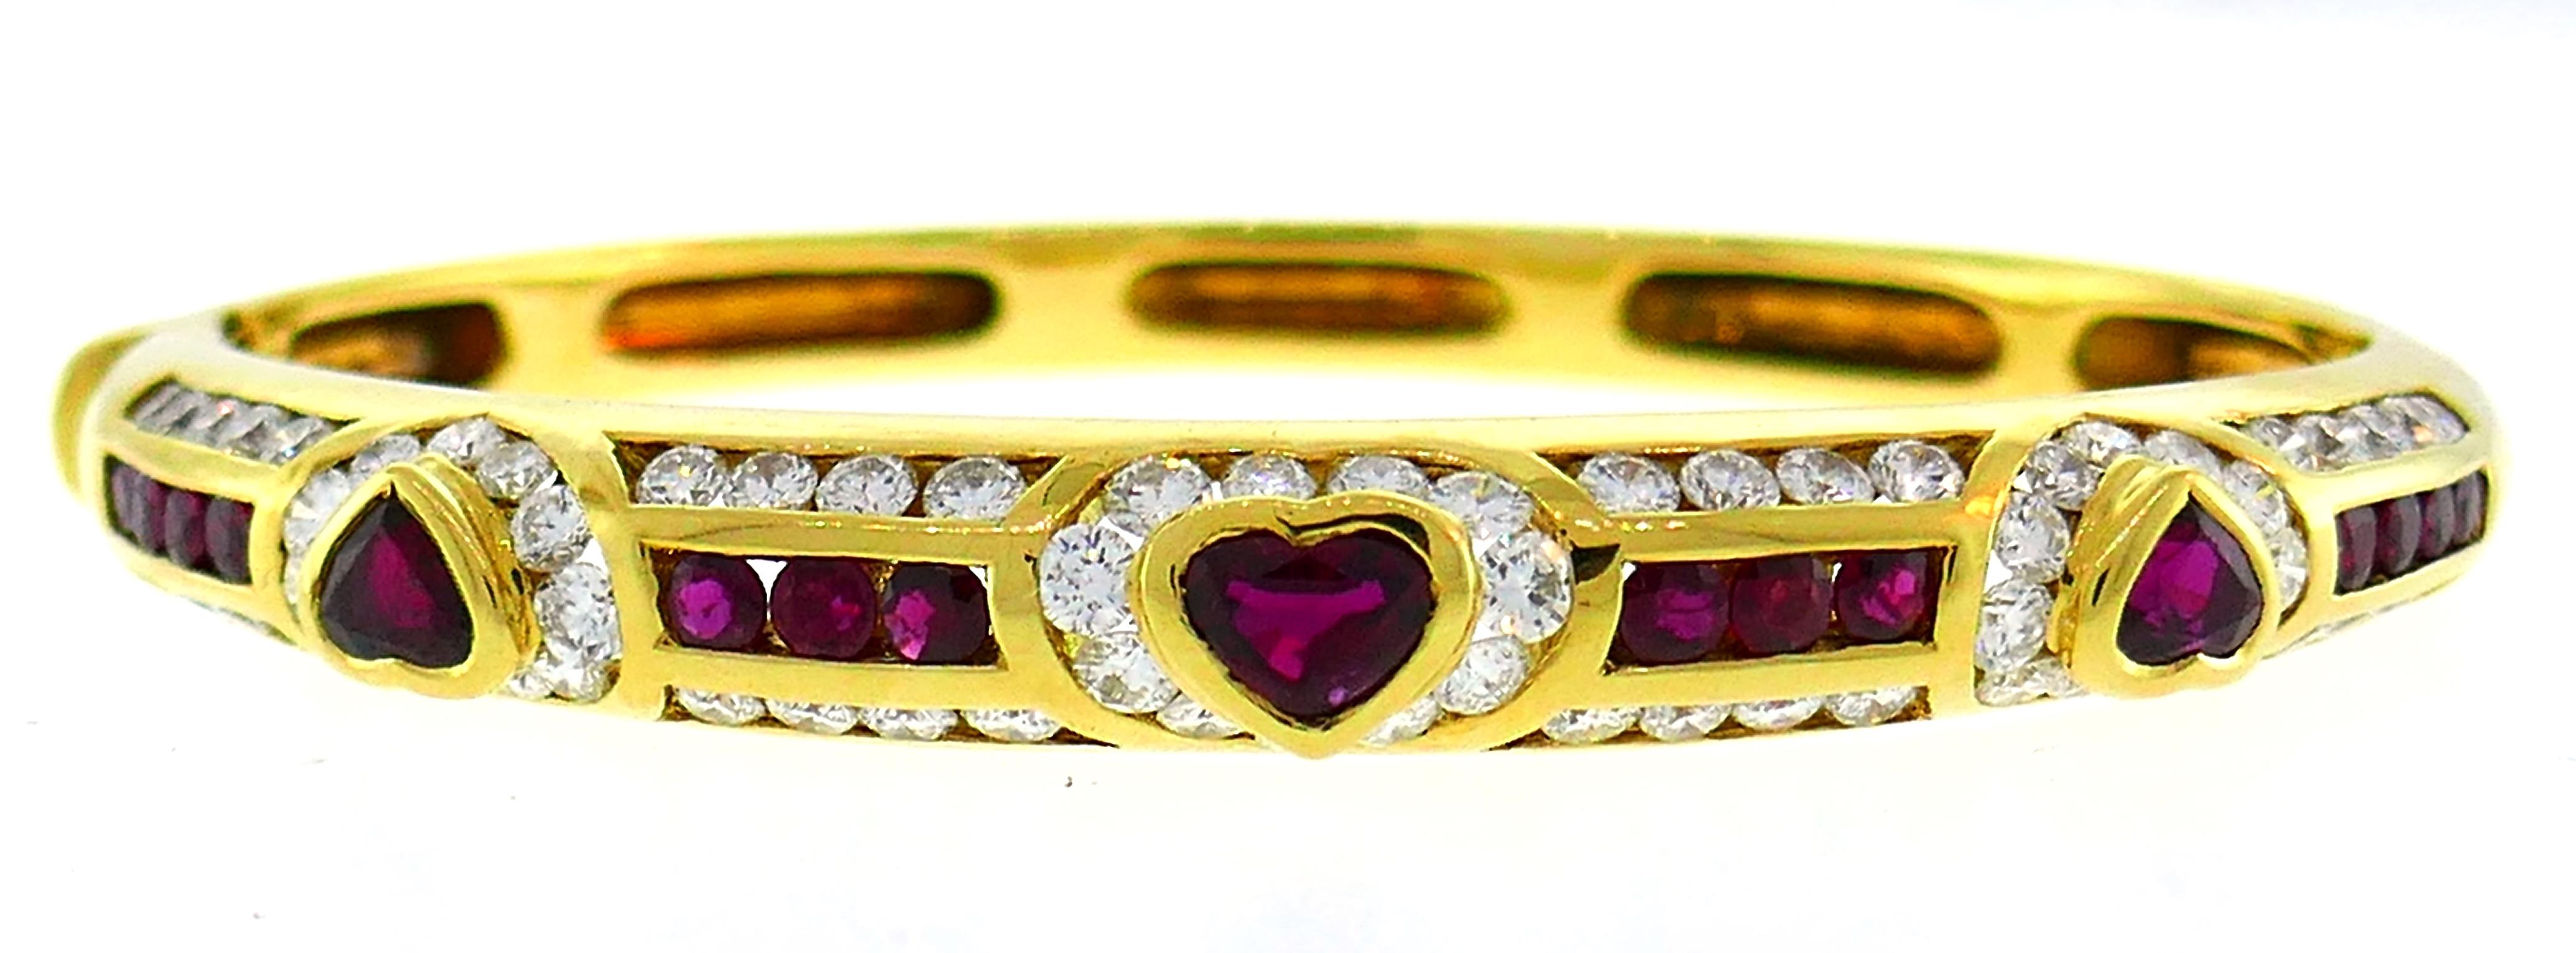 Fred Paris Heart Ruby Yellow Gold Bangle Bracelet with Diamond Accents, 1970s (Rundschliff)